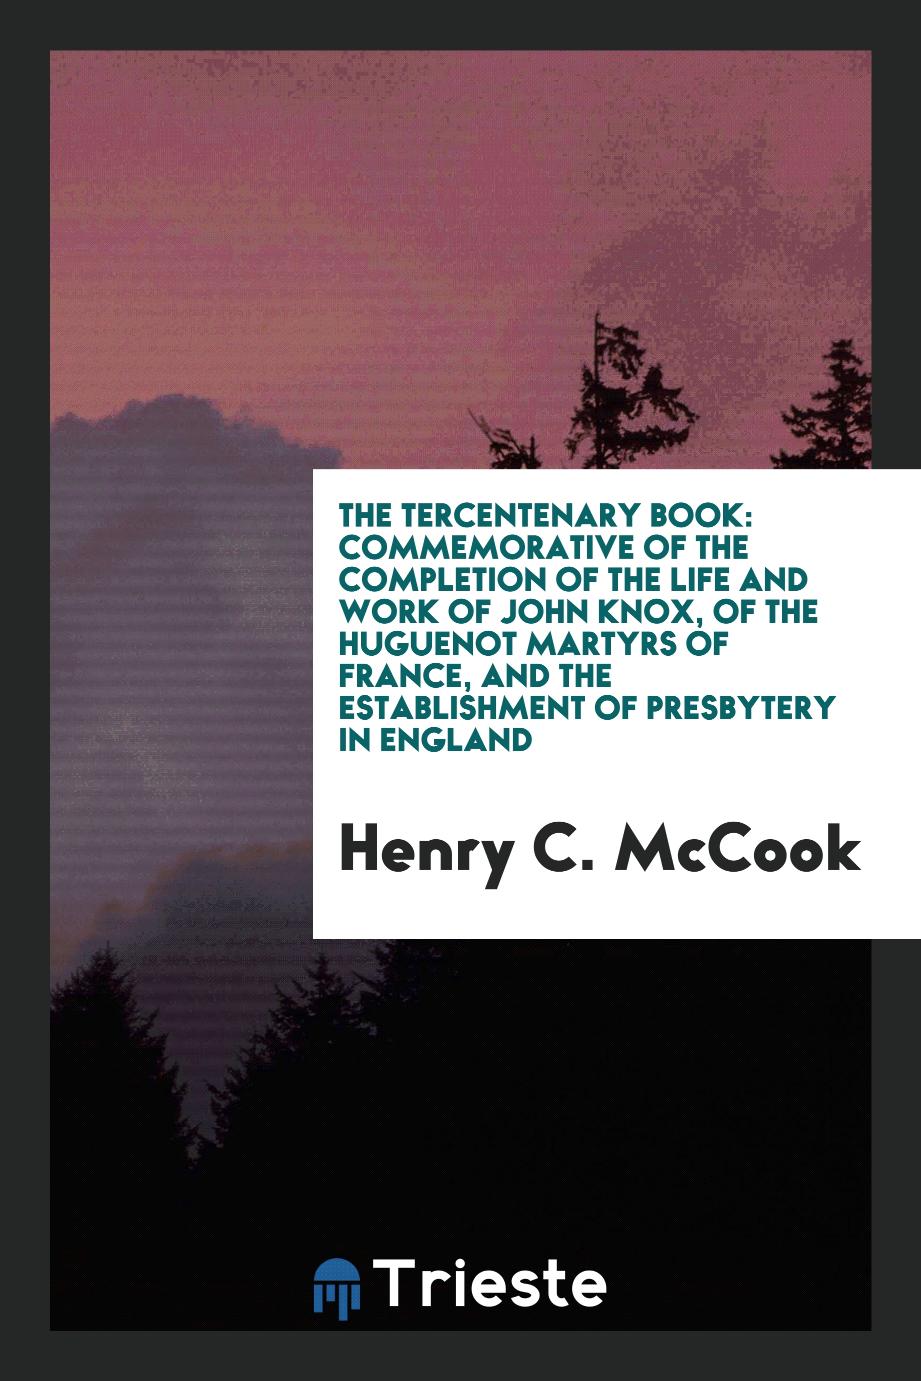 The Tercentenary Book: Commemorative of the Completion of the Life and Work of John Knox, of the Huguenot Martyrs of France, and the Establishment of Presbytery in England